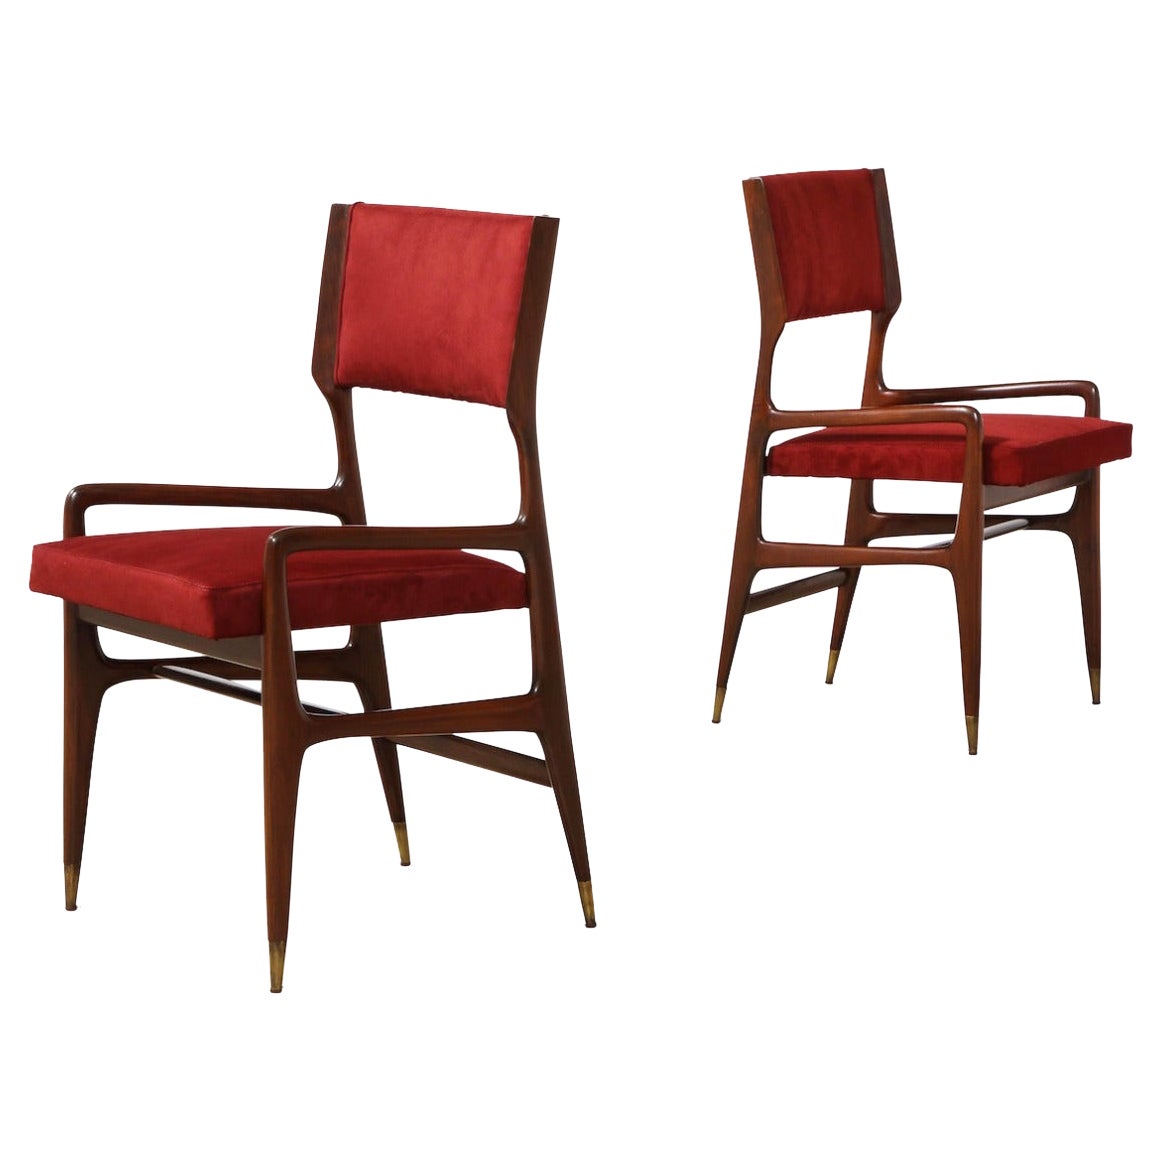  Model #676 Dining Chairs by Gio Ponti for Cassina